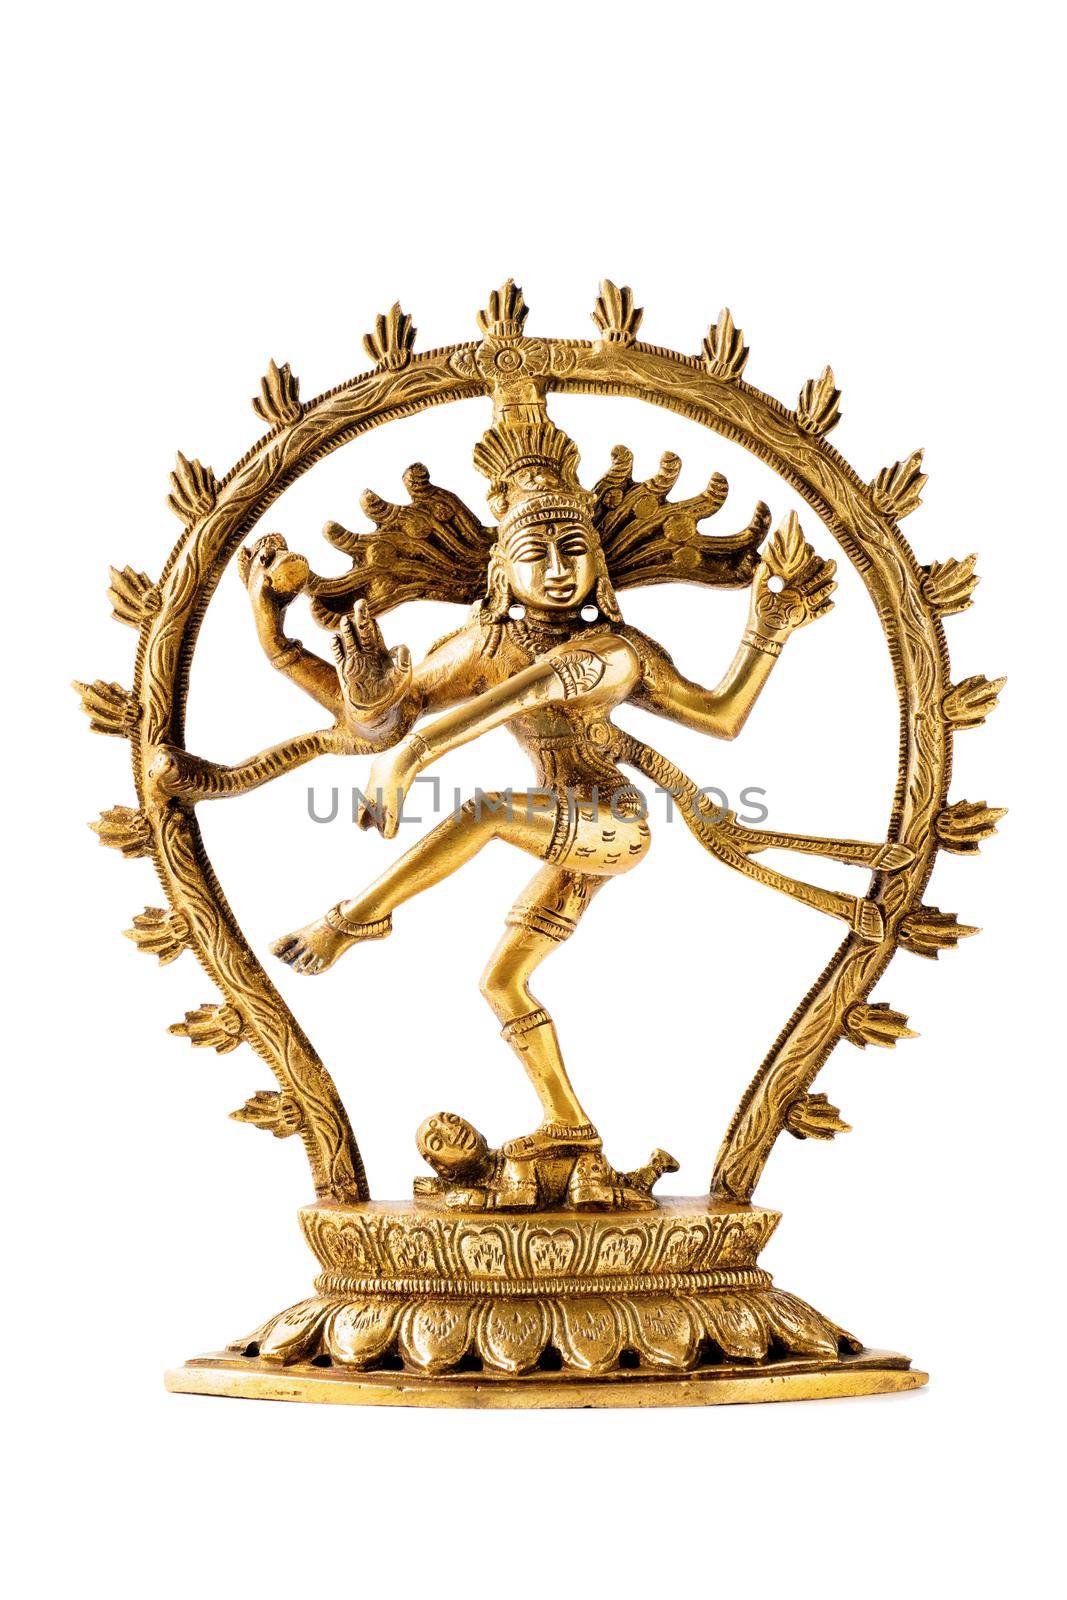 Statue of Shiva Nataraja - Lord of Dance isolated by dimol